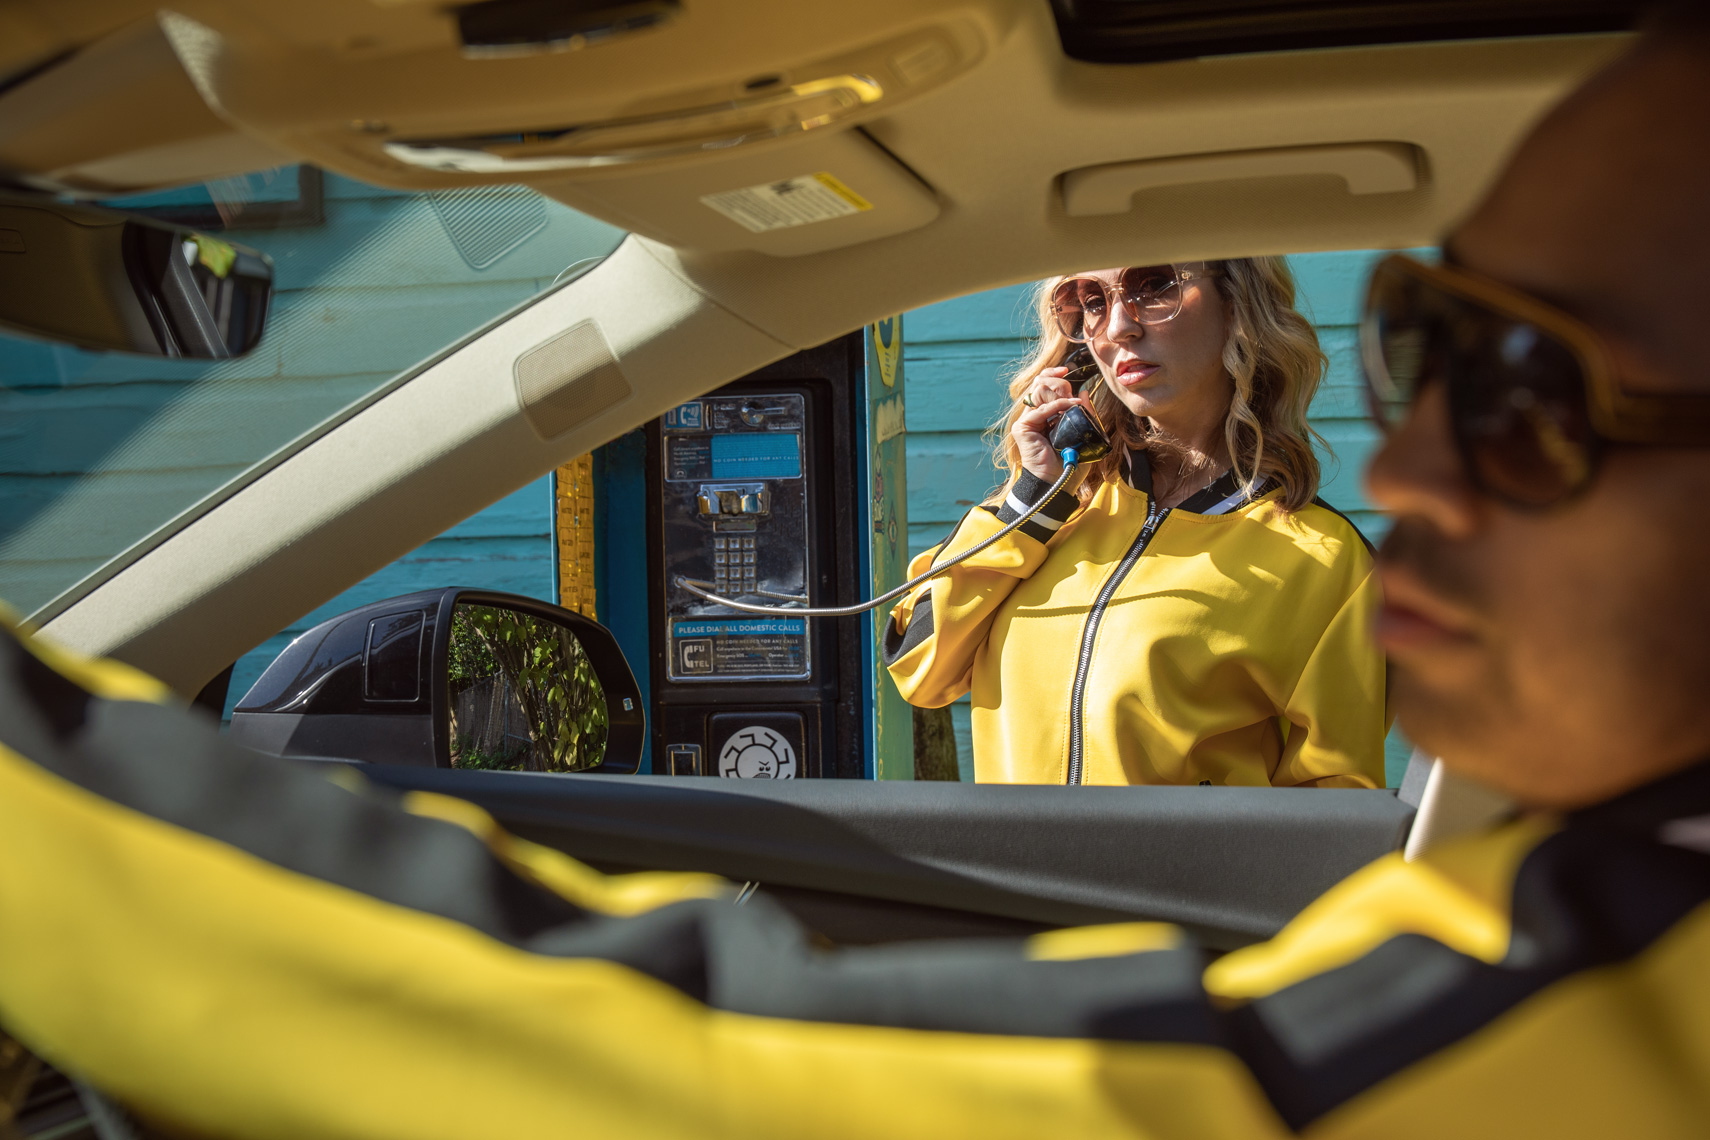 Woman at phone booth, man in car, with both wearing sunglasses and yellow track suits.